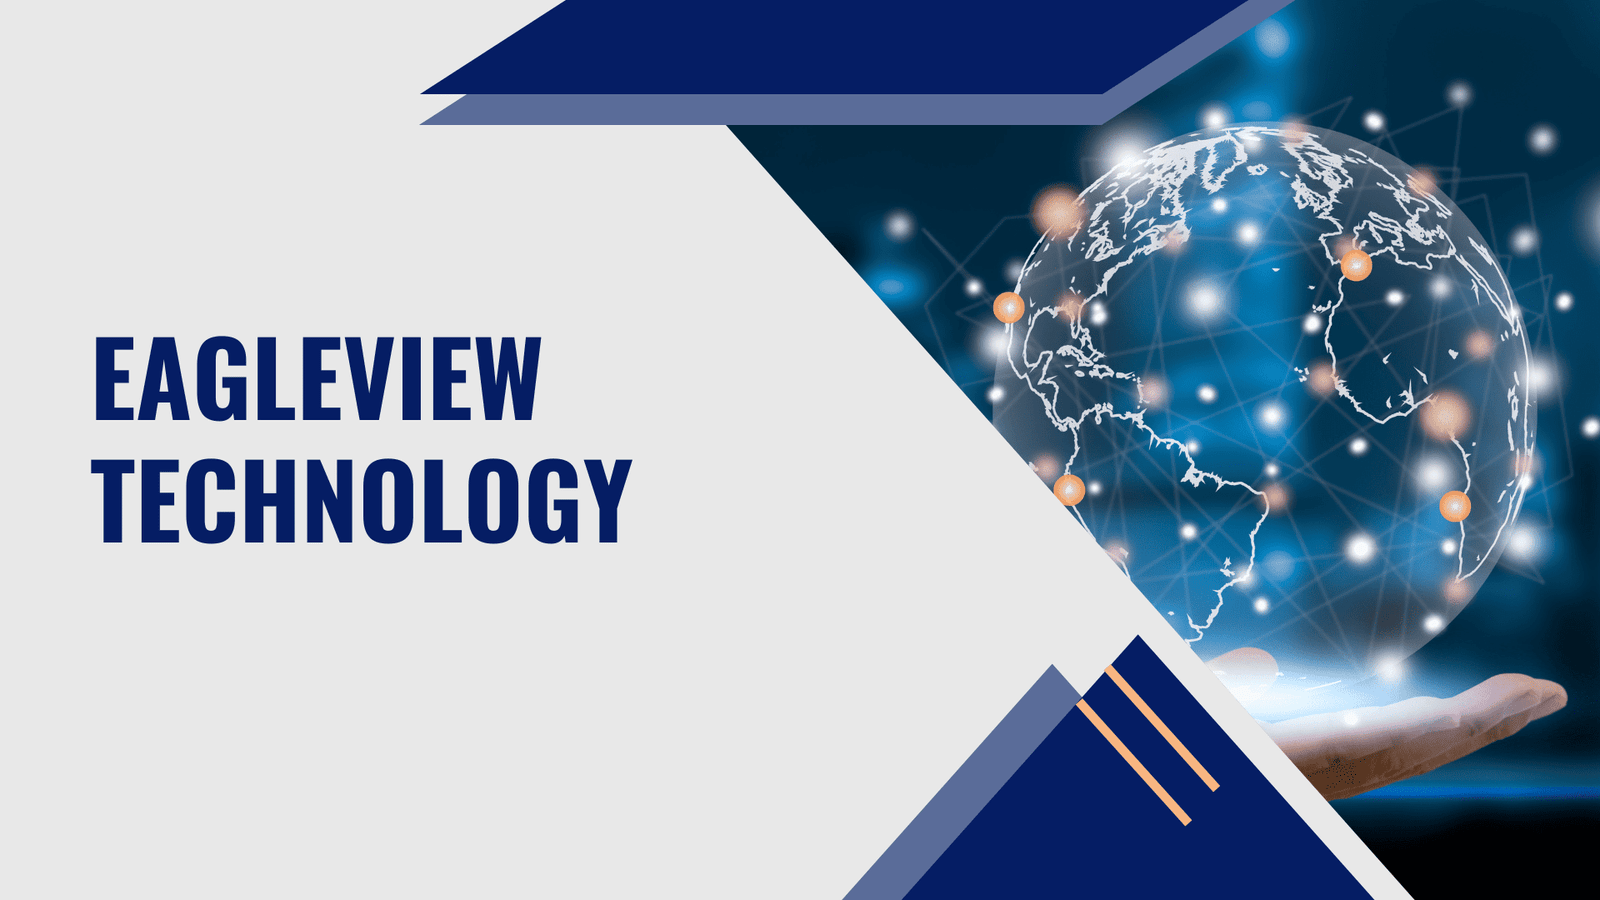 Eagleview Technology is a tech company that provides data analytics, software services, and aerial imagery tools to various industries.